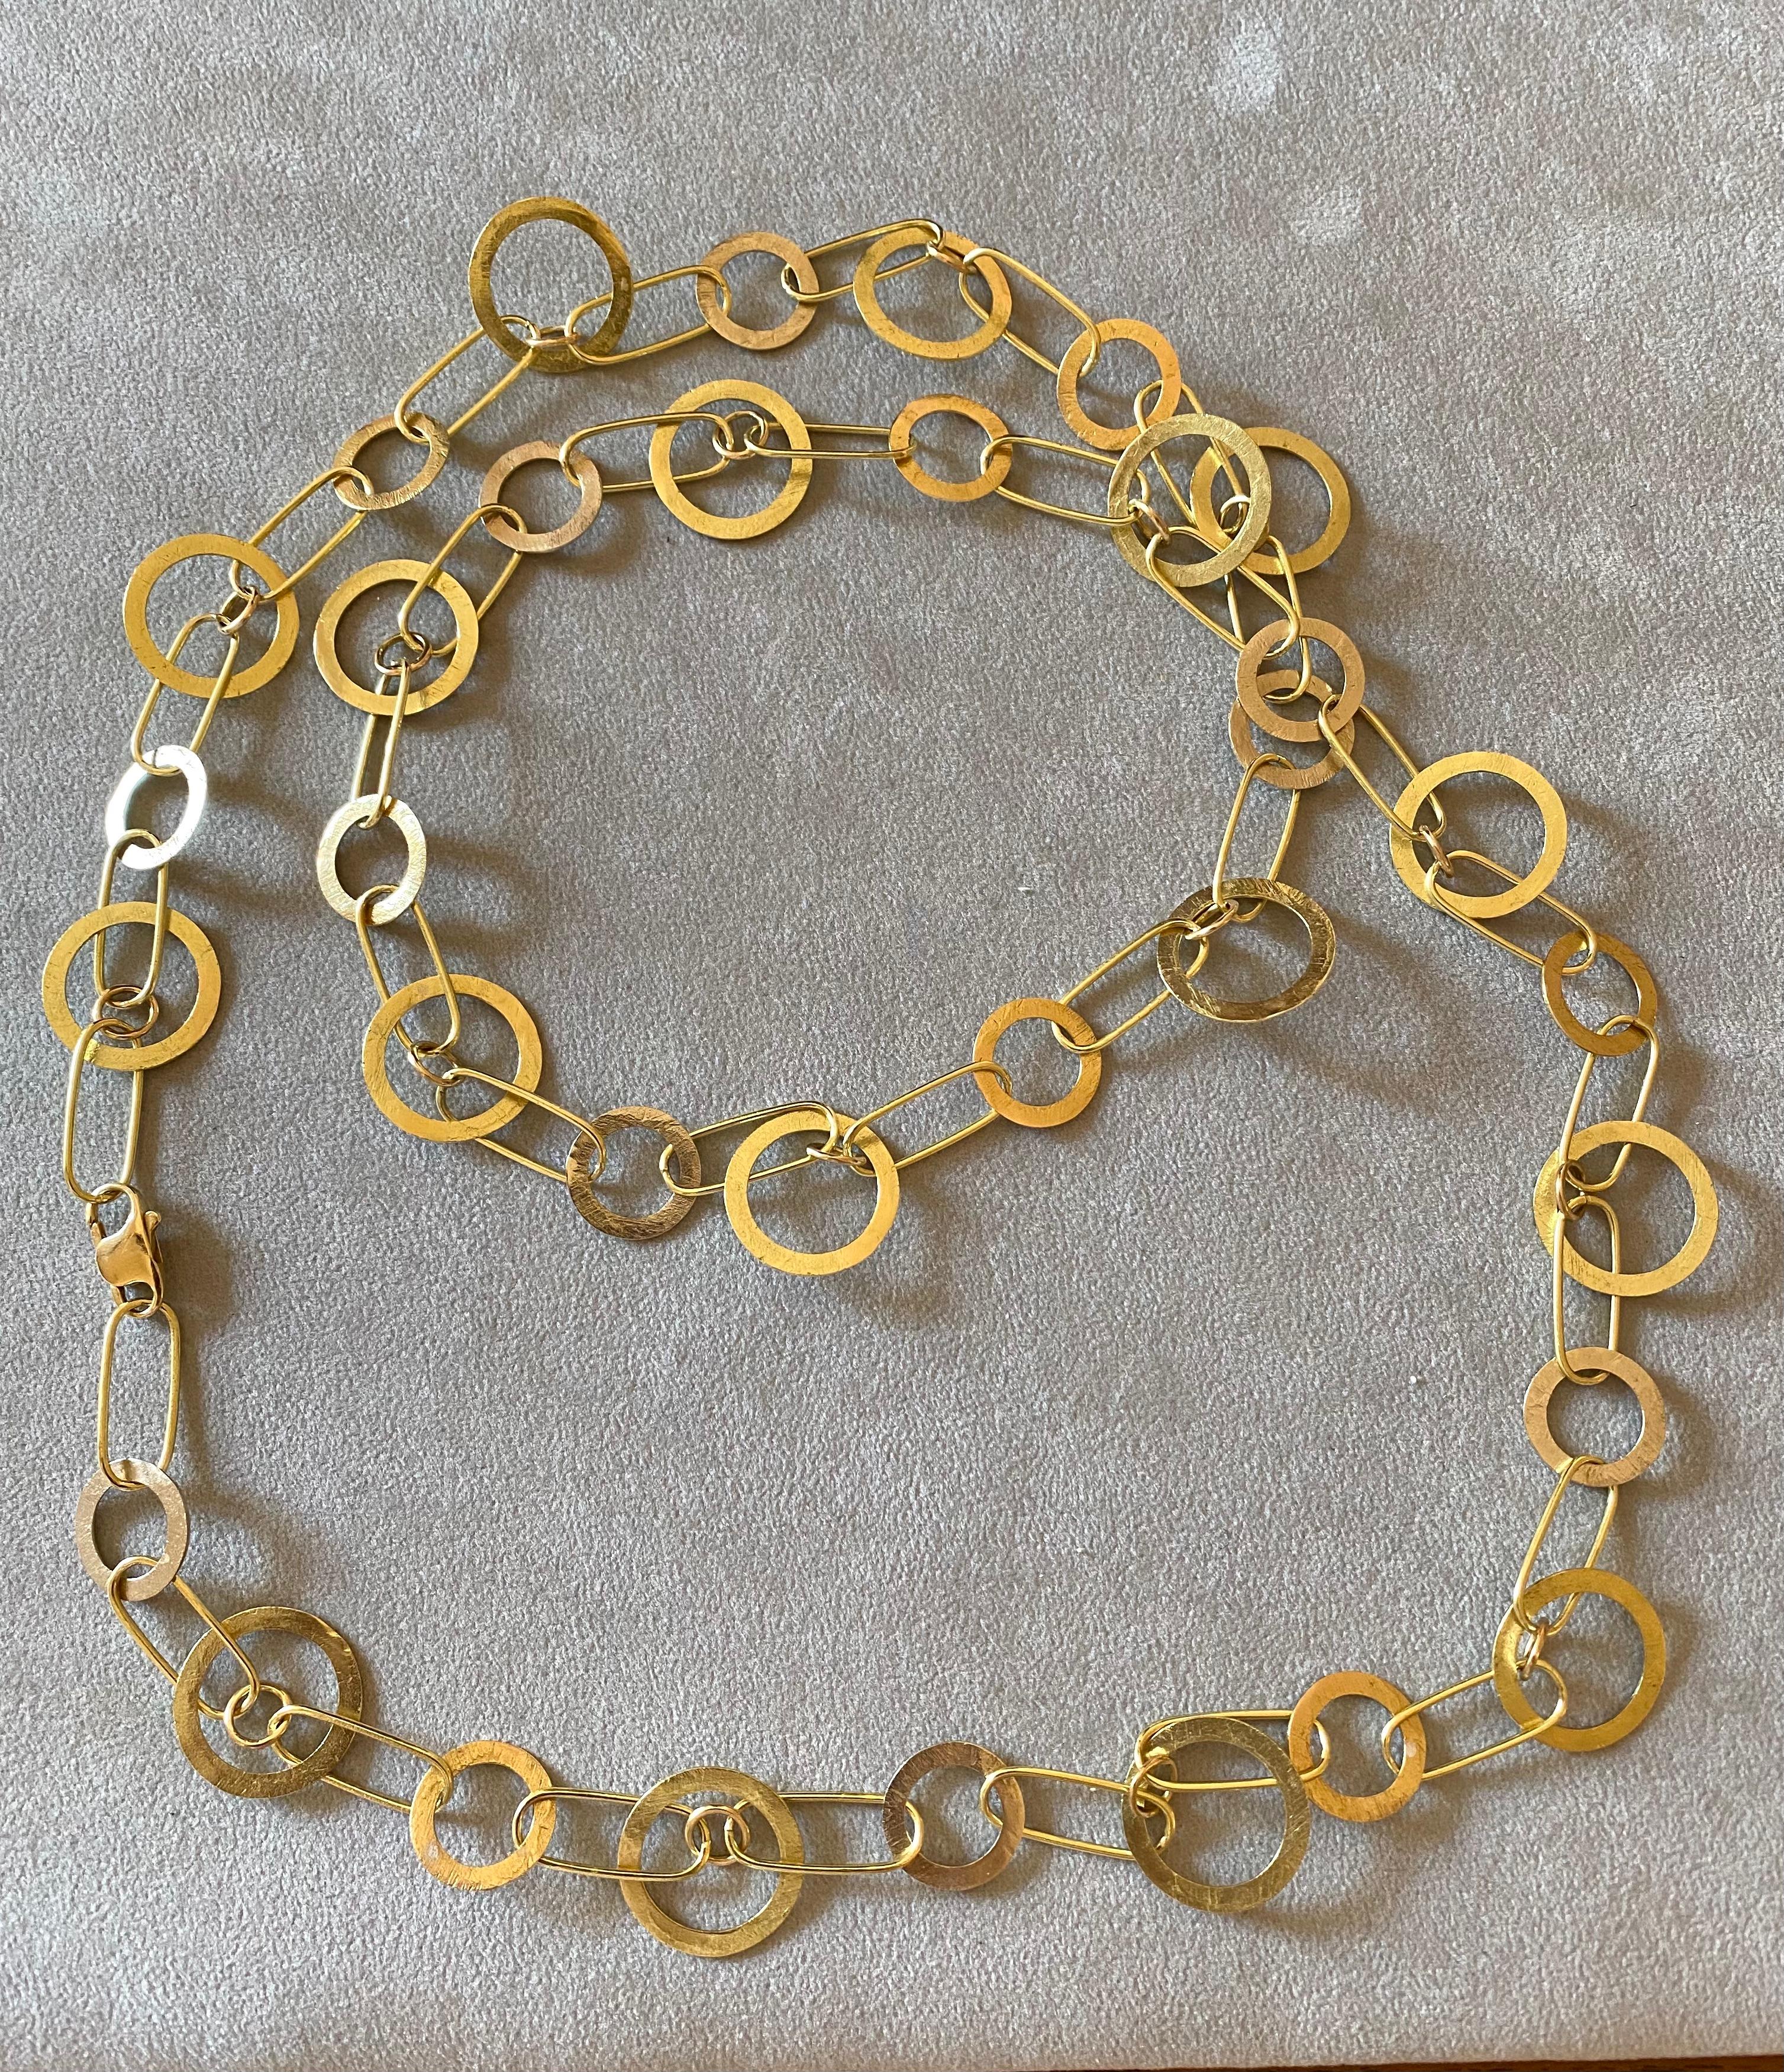 Hammered Handcrafted 18K Yellow Gold Link Chain Necklace Made in Italy For Sale 3